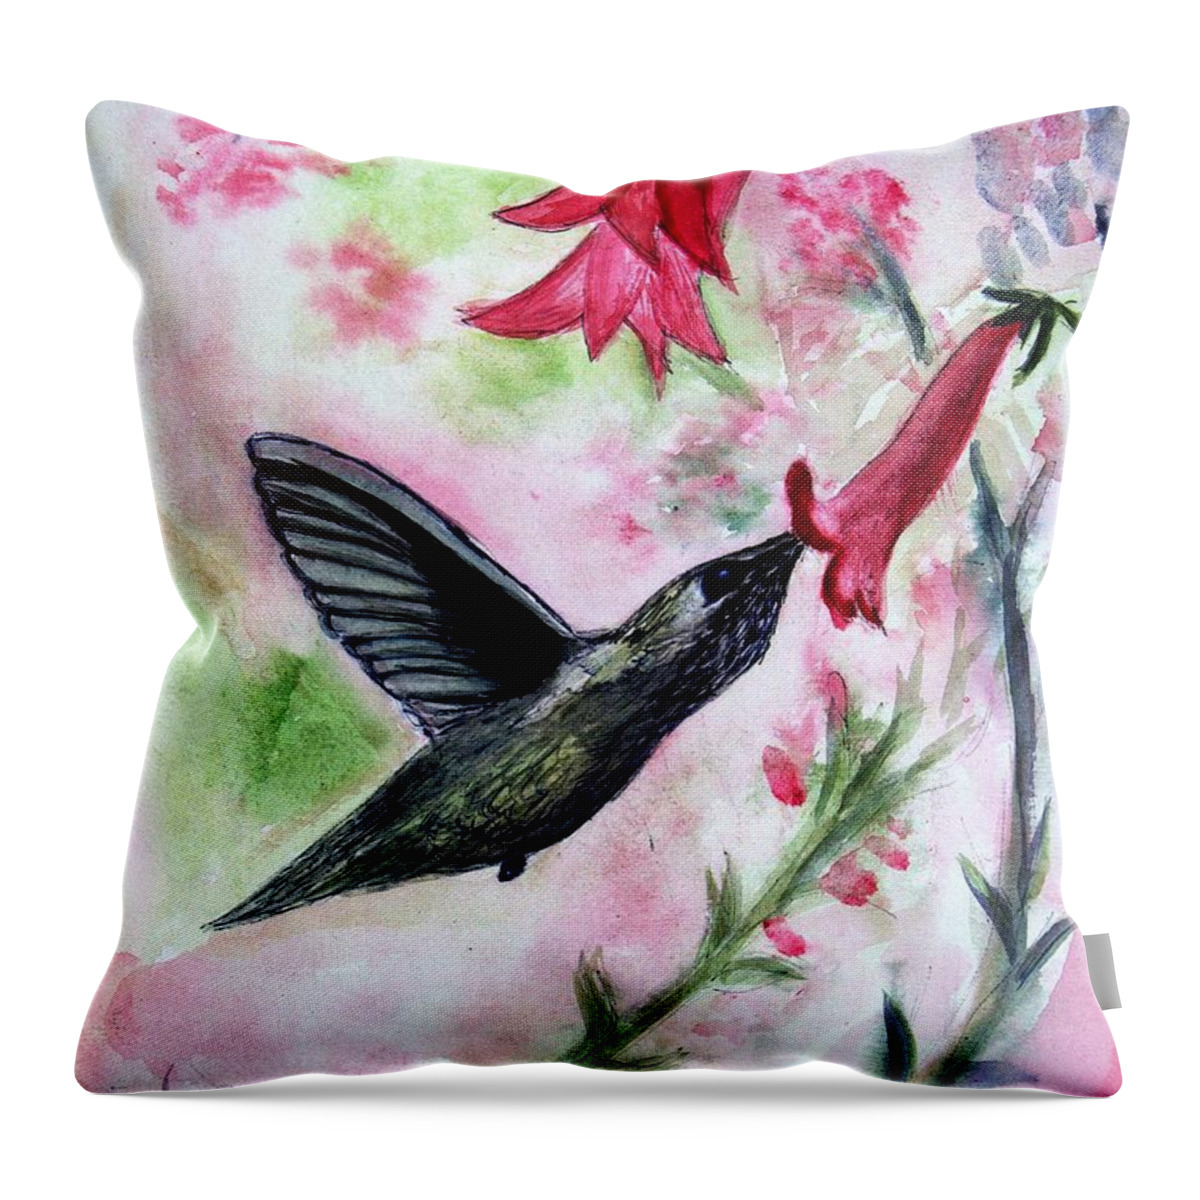 Animal Throw Pillow featuring the painting Angies Humming Bird by Donna Walsh